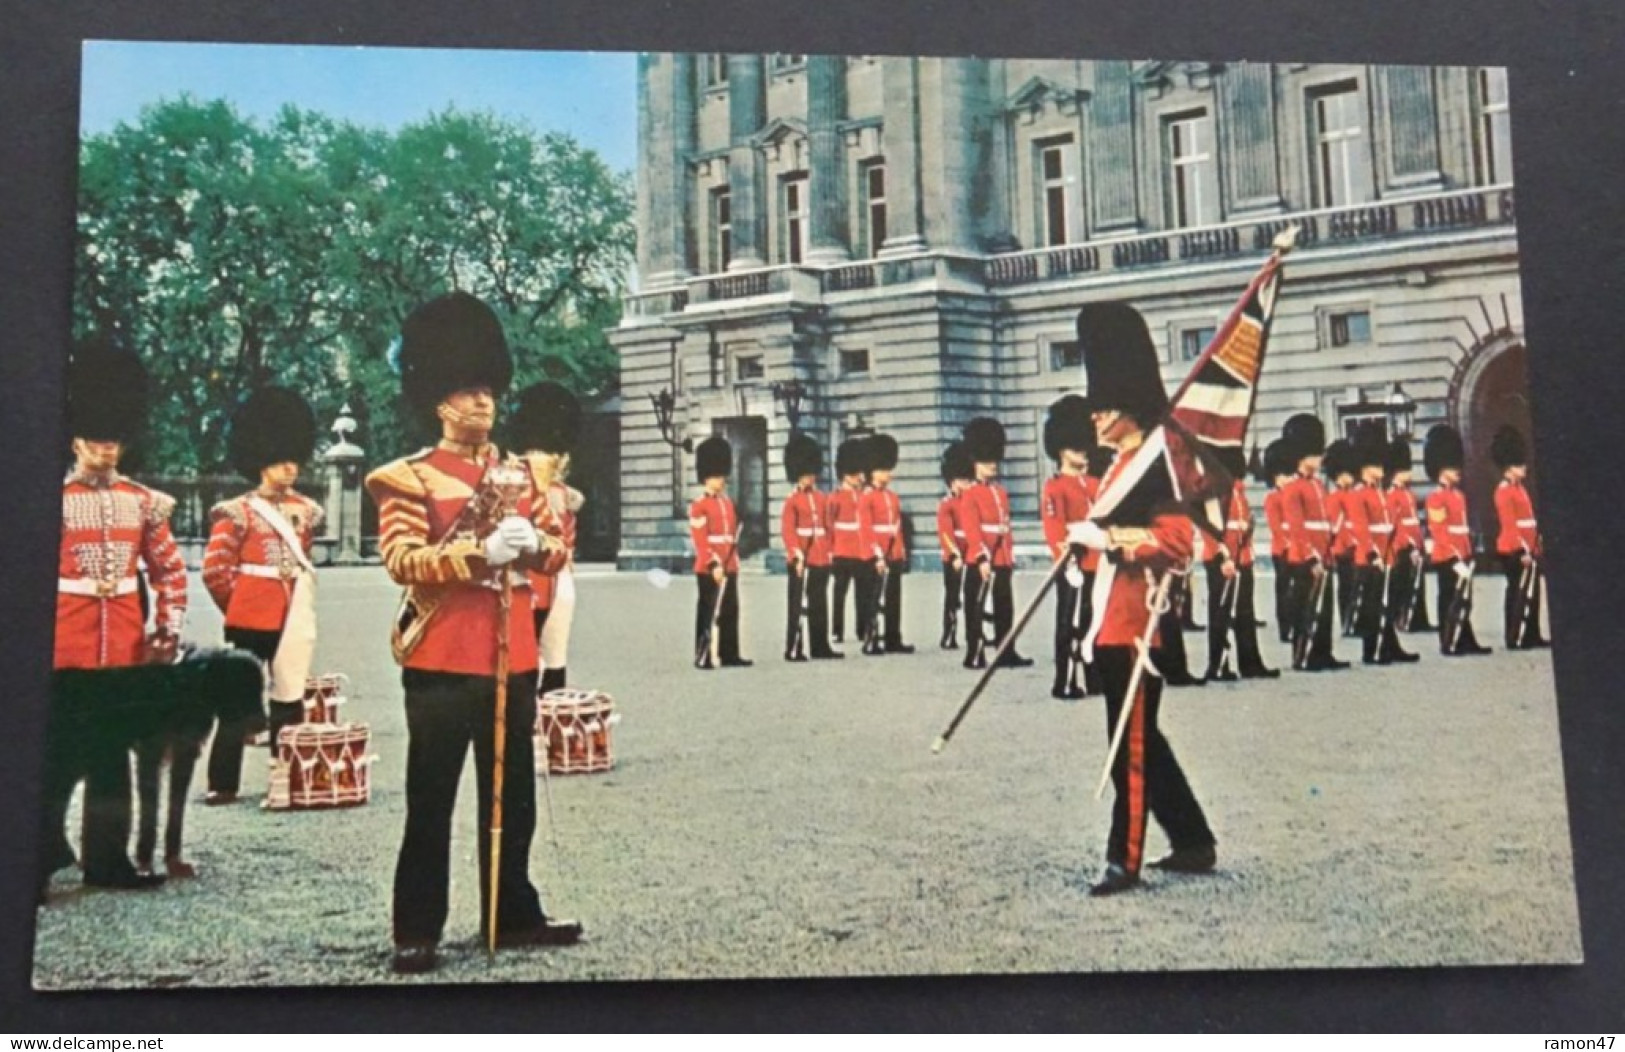 London - Changing The Guards Ceremony At Buckingham Palace - The Photographic Greeting Card, London - Buckingham Palace